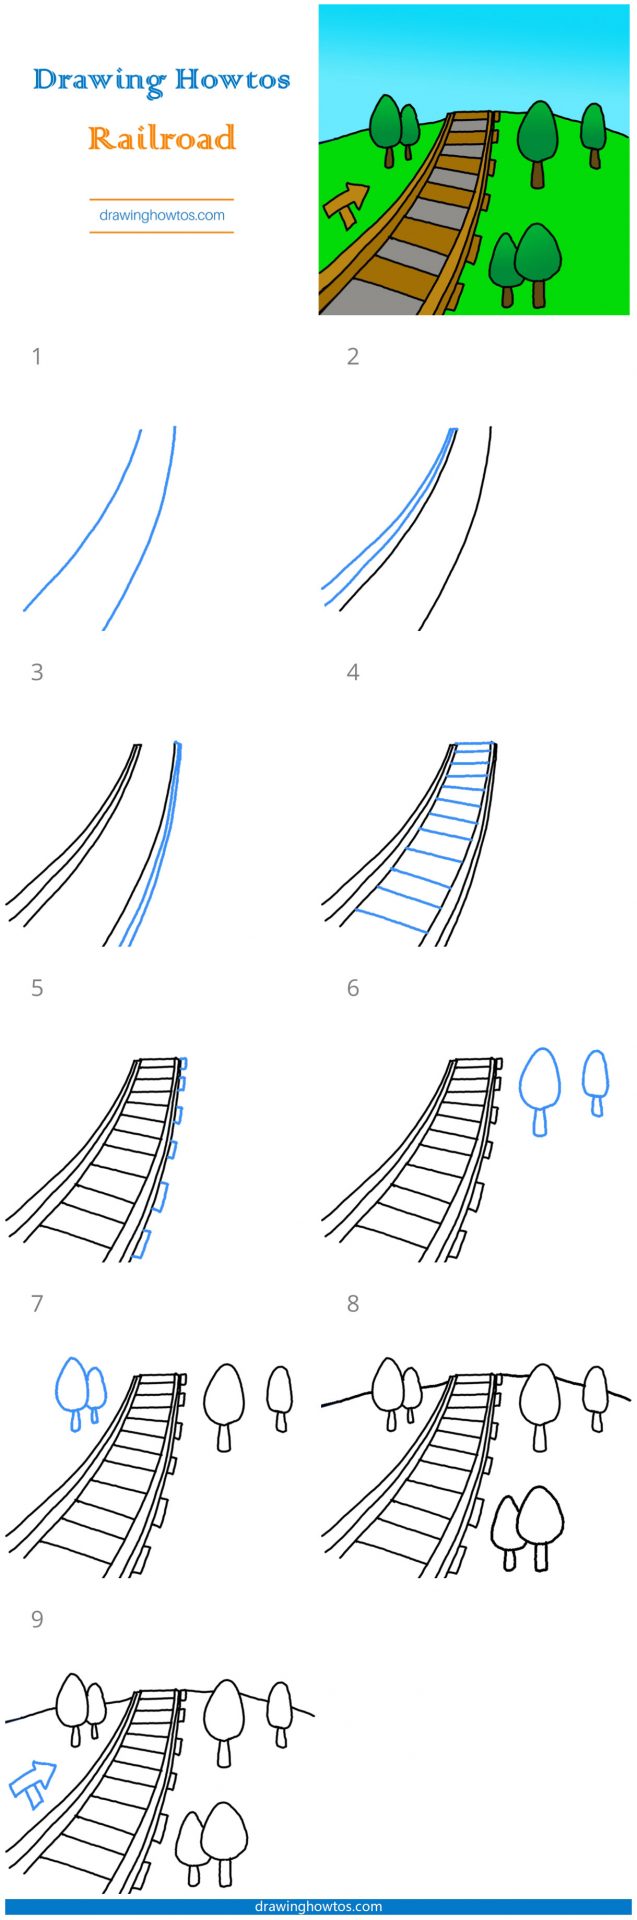 How to Draw Railroad Tracks Step by Step